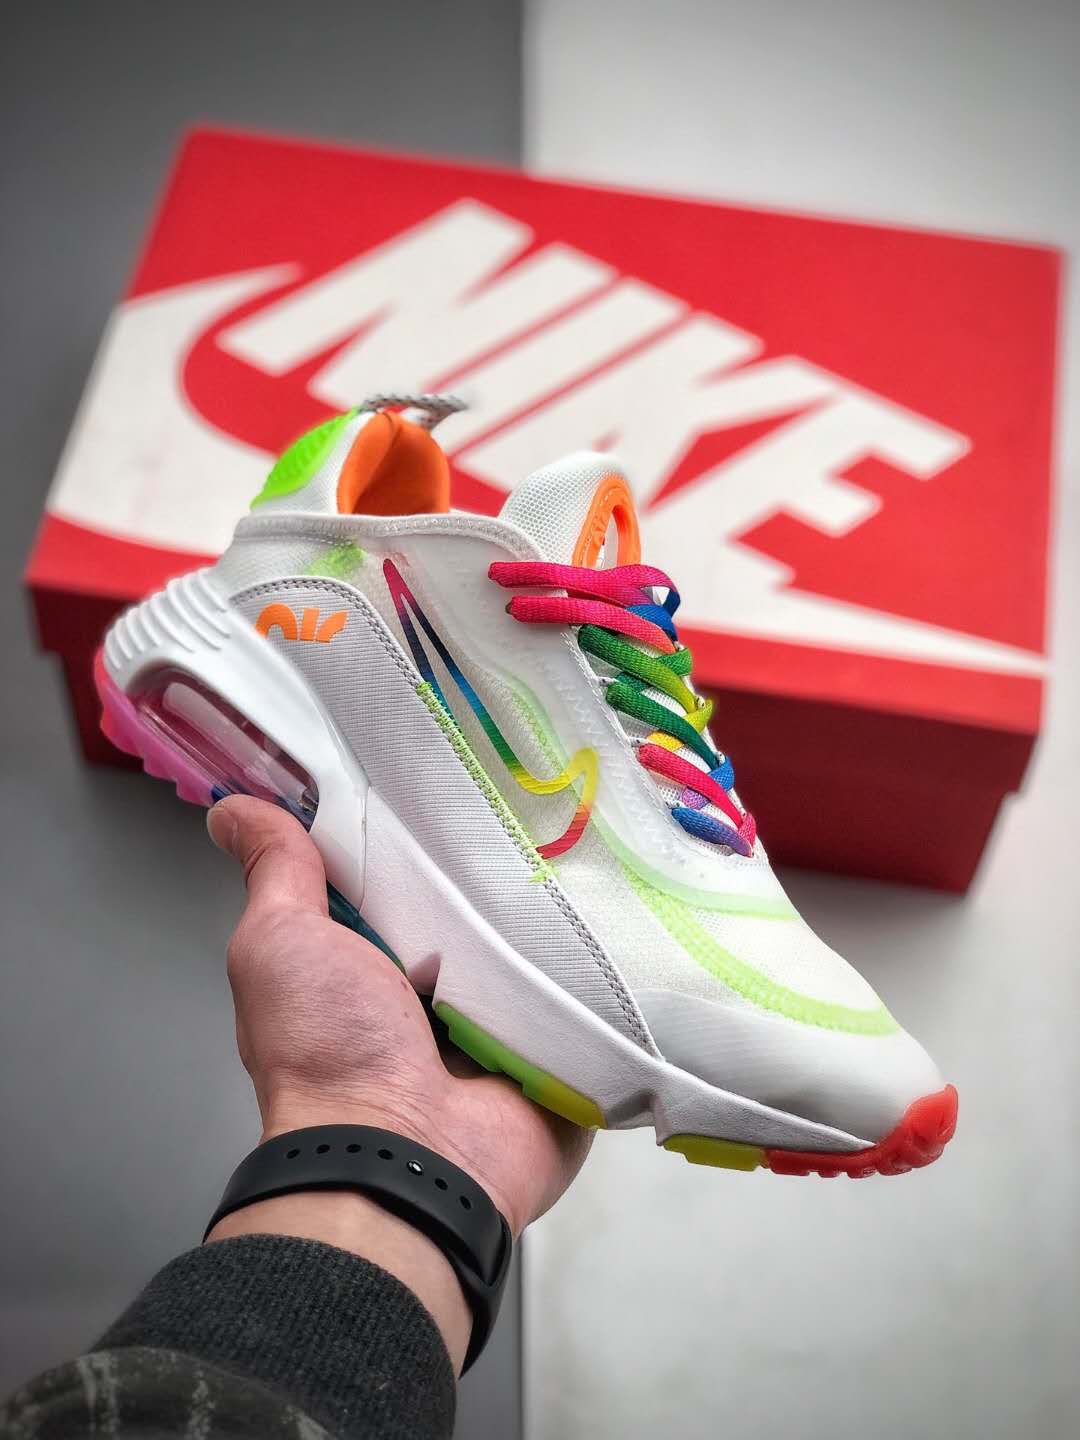 Nike Air Max 2090 White Multi Color CT7695-105 - Shop Now for the Latest Nike Air Max Sneakers